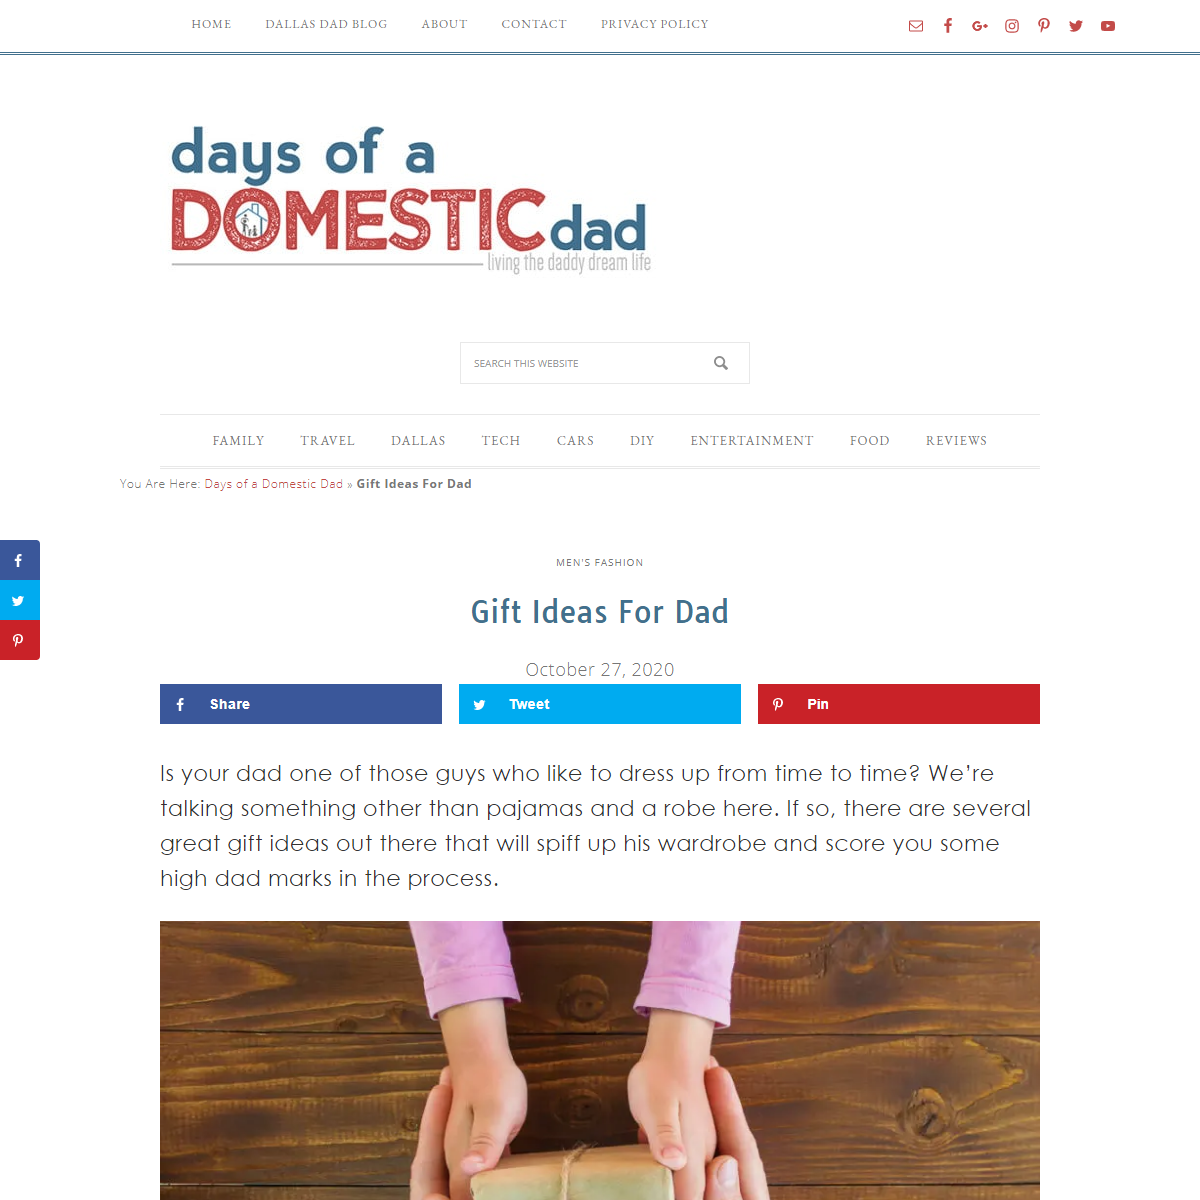 A complete backup of https://daysofadomesticdad.com/gift-ideas-for-the-dad/